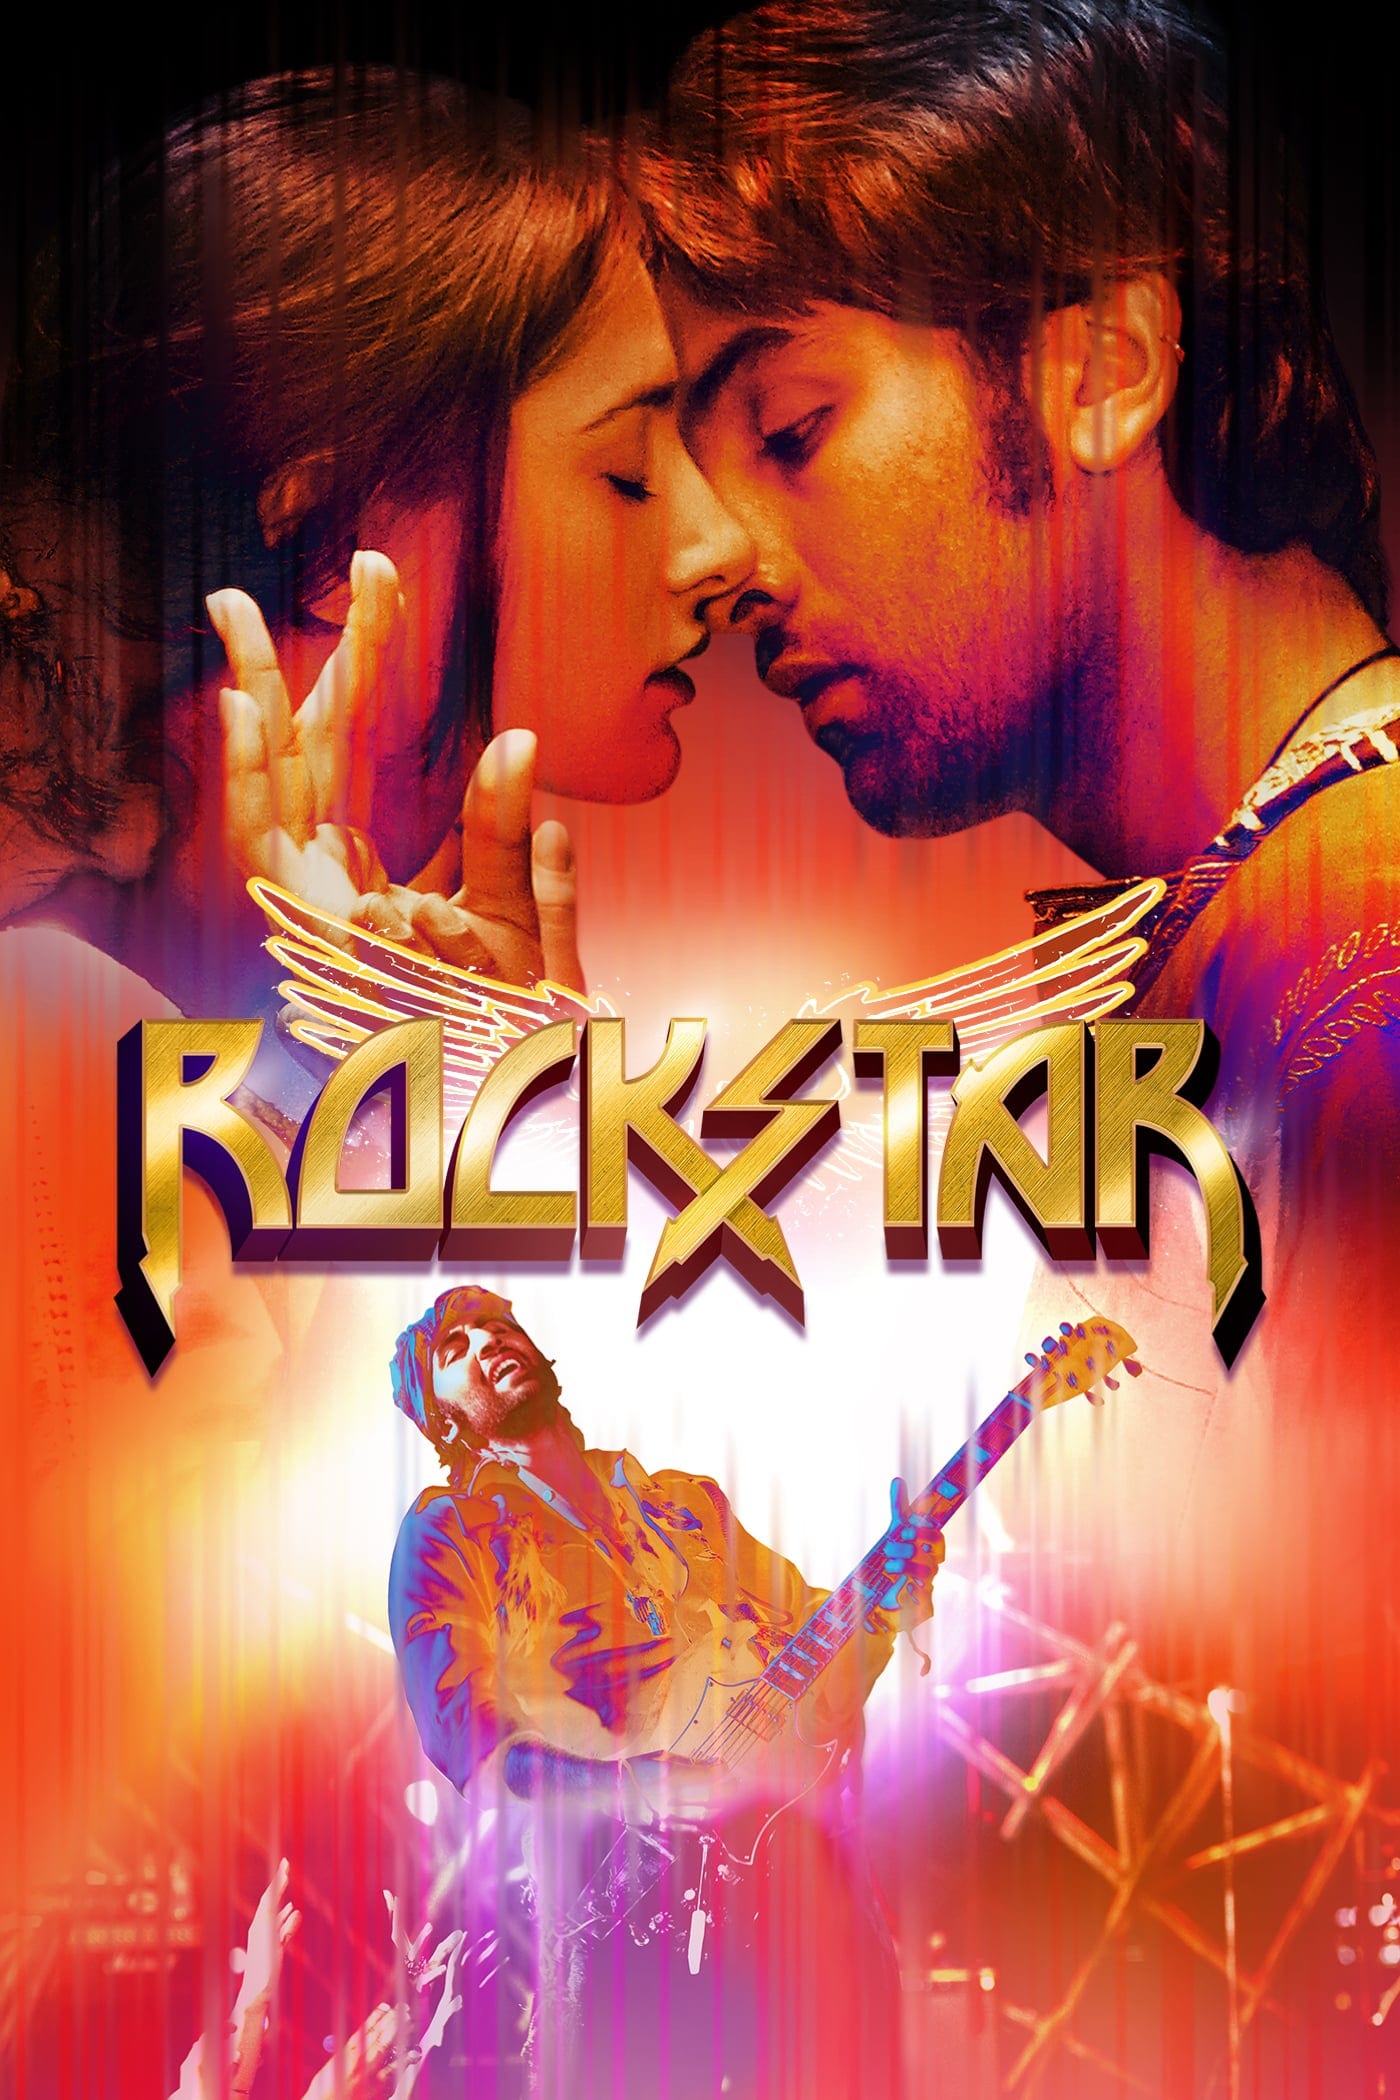 Poster for the movie "Rockstar"